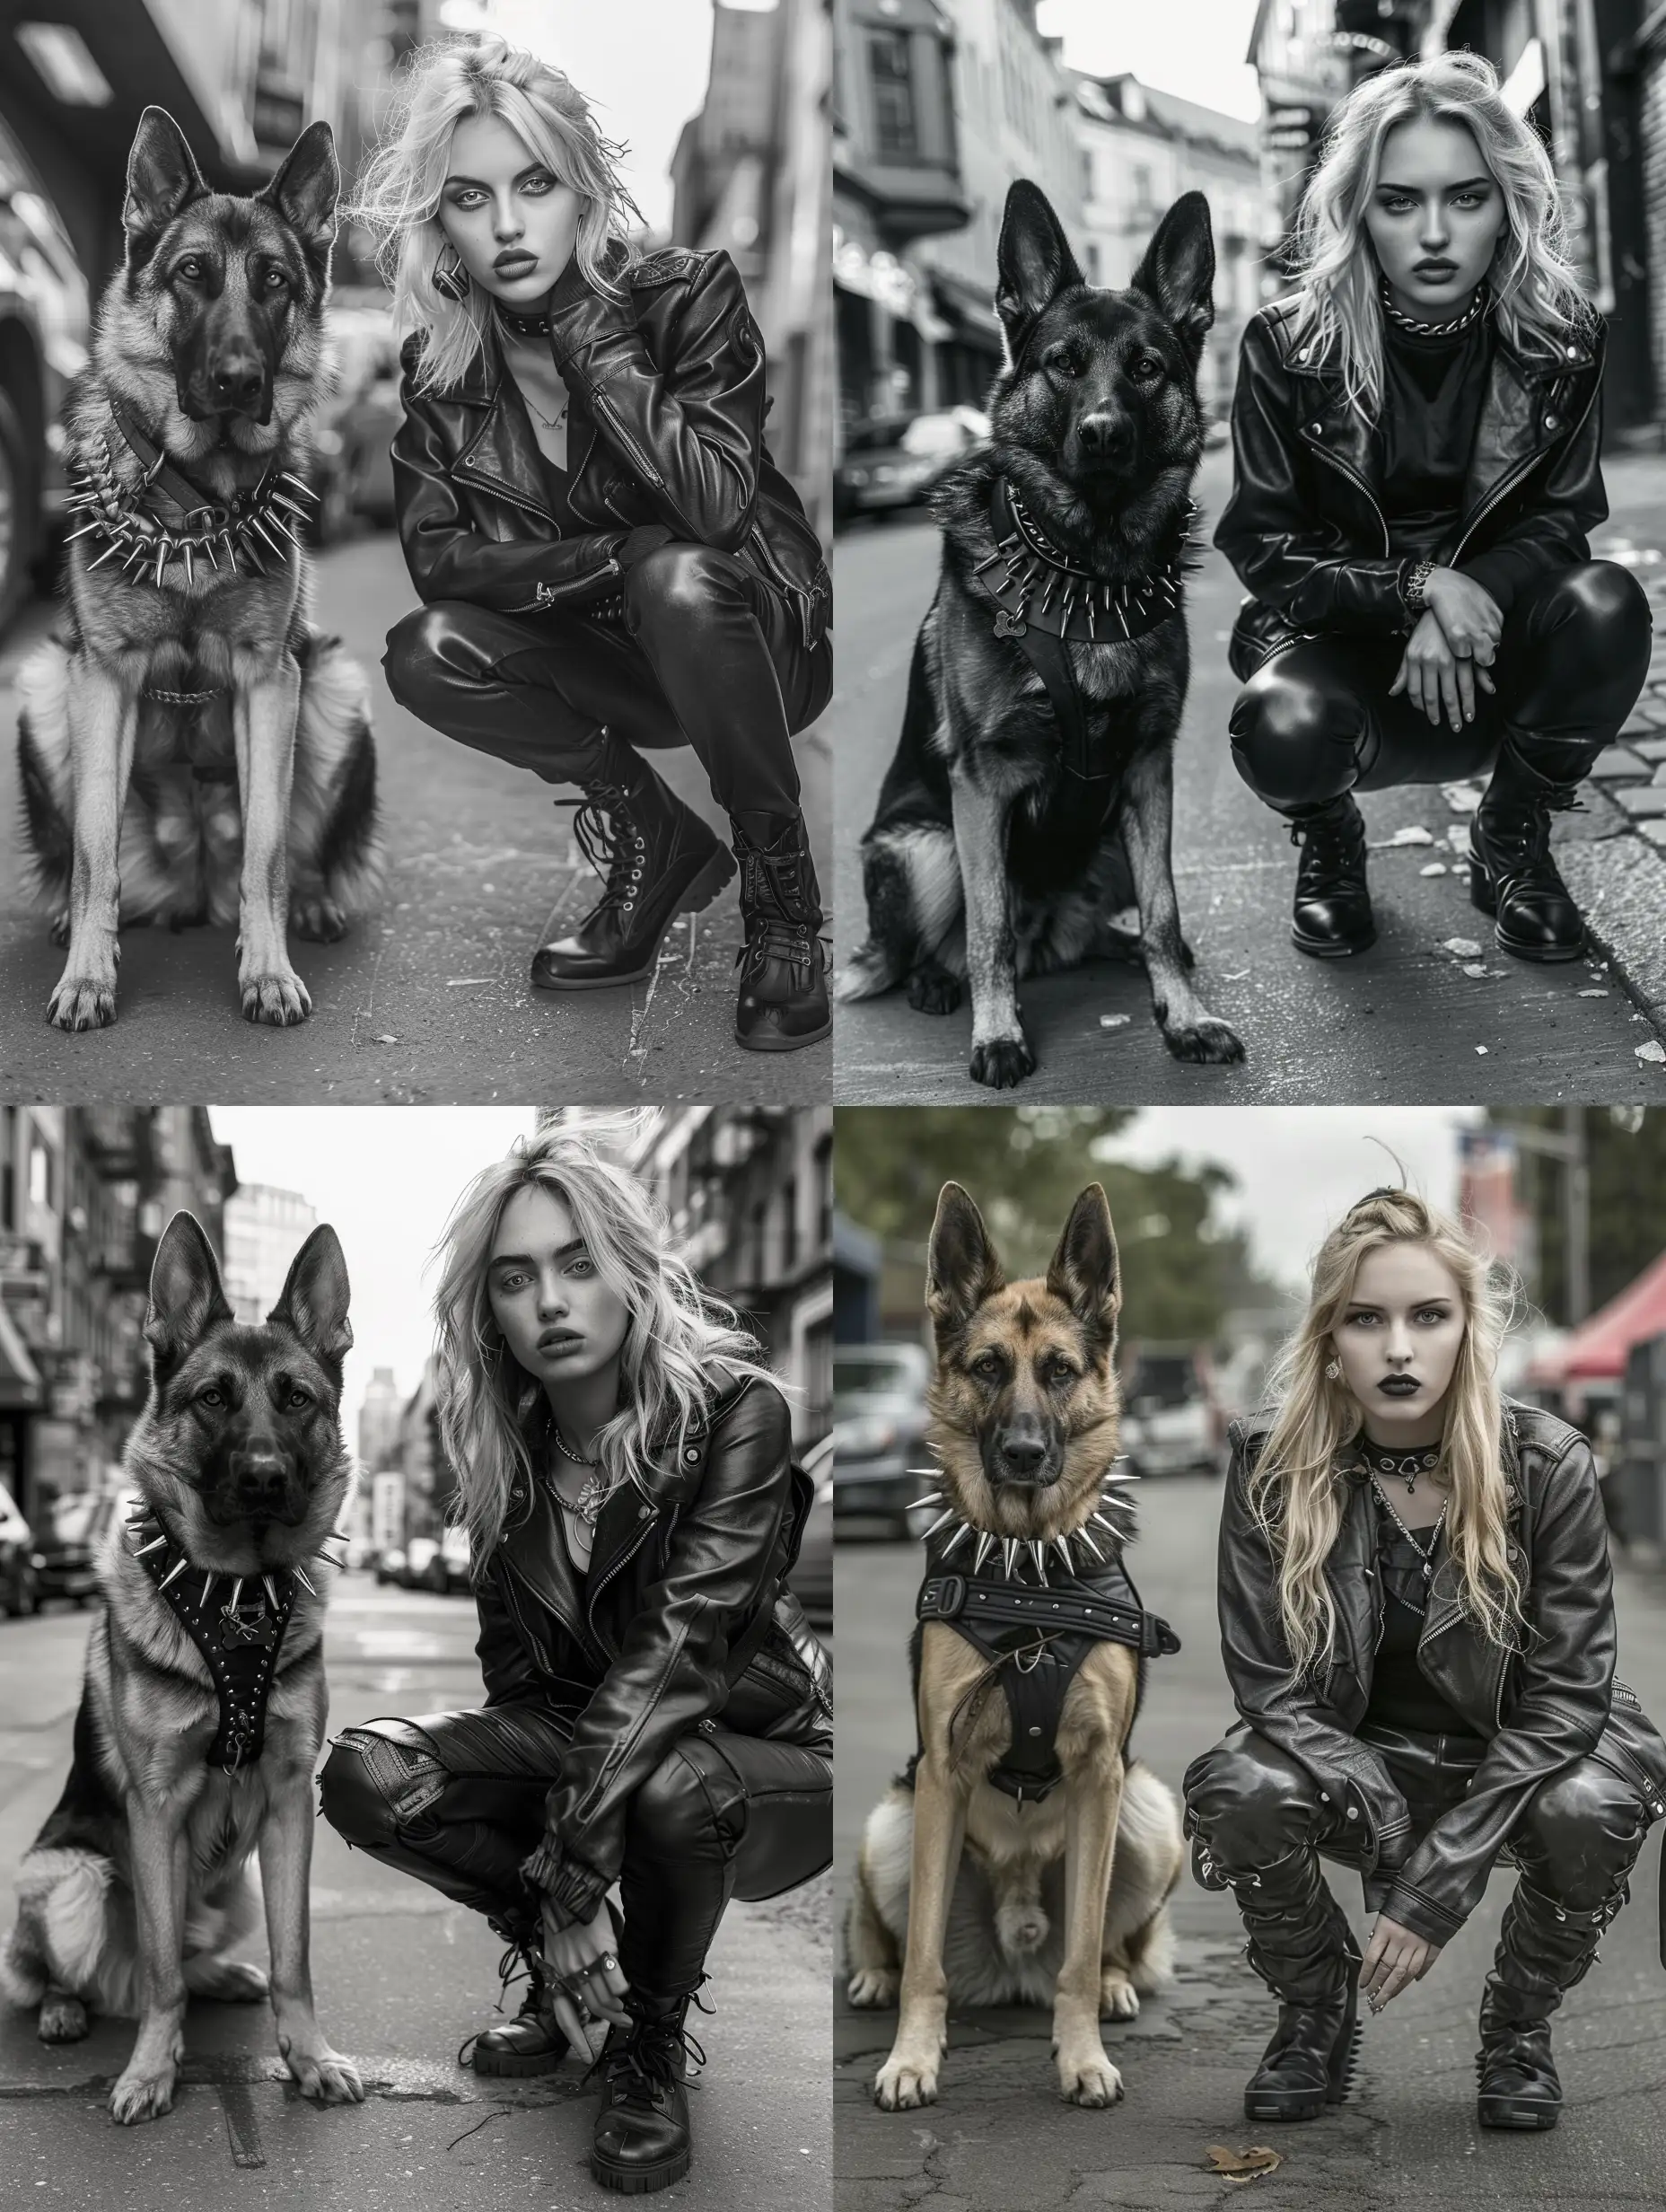 A girl with blond hair squats on the street in a leather jacket and leather pants, her face is clearly visible and looks into the camera next to her German Shepherd dog in a collar with spikes. 